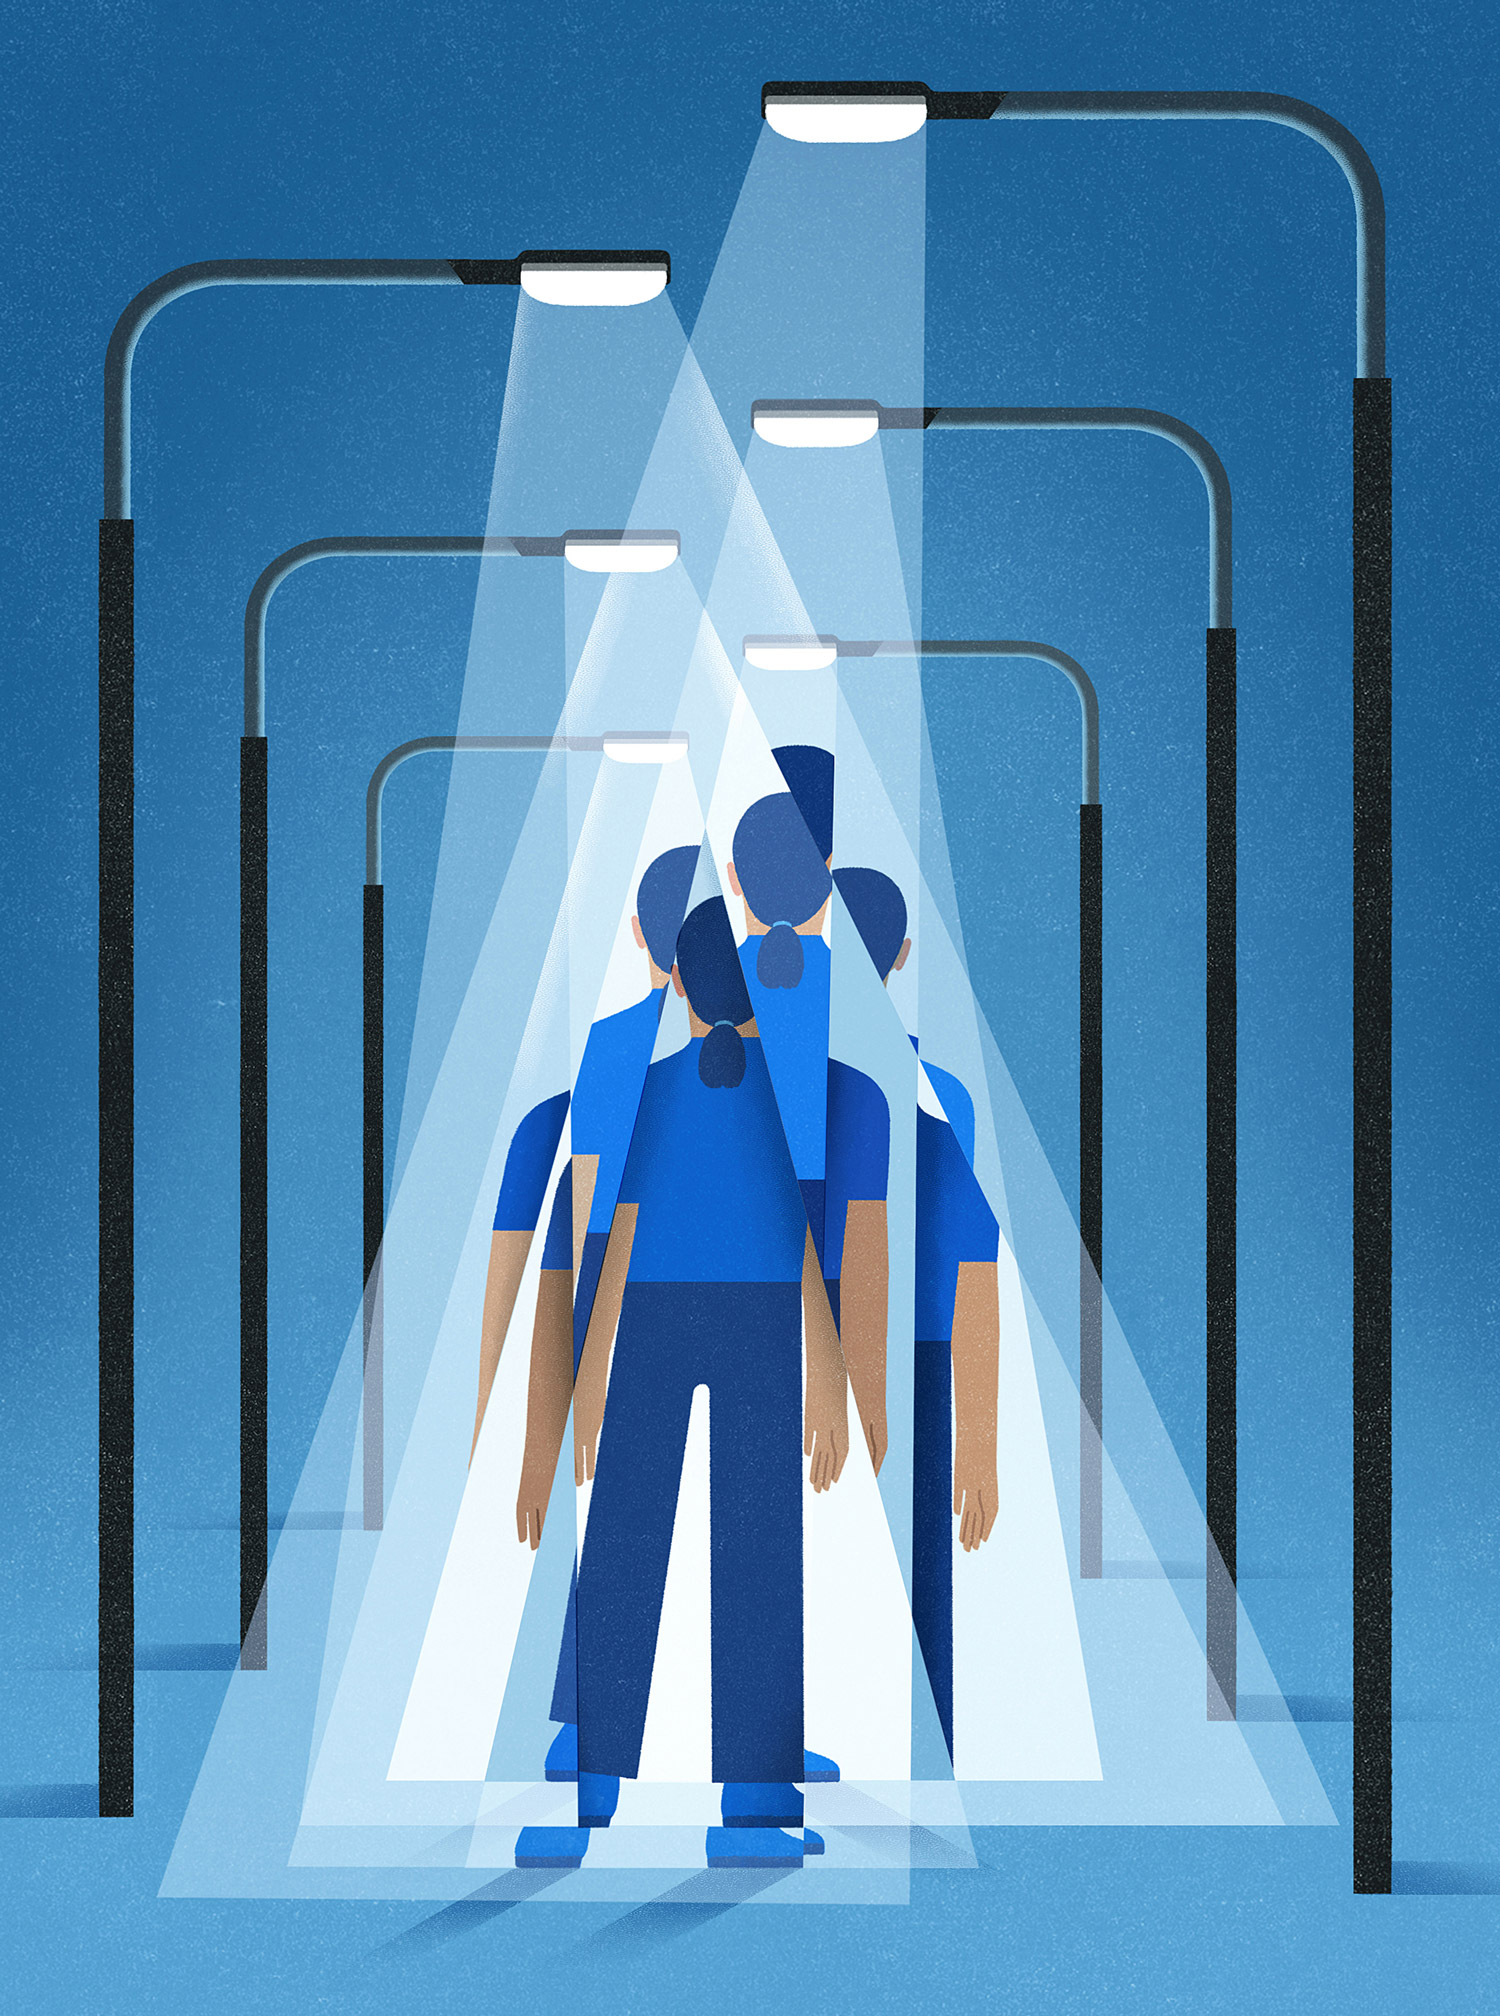 Digital illustration, primarily in blue tones, depicting street lights on either side, shining down on fragmented pieces of a person